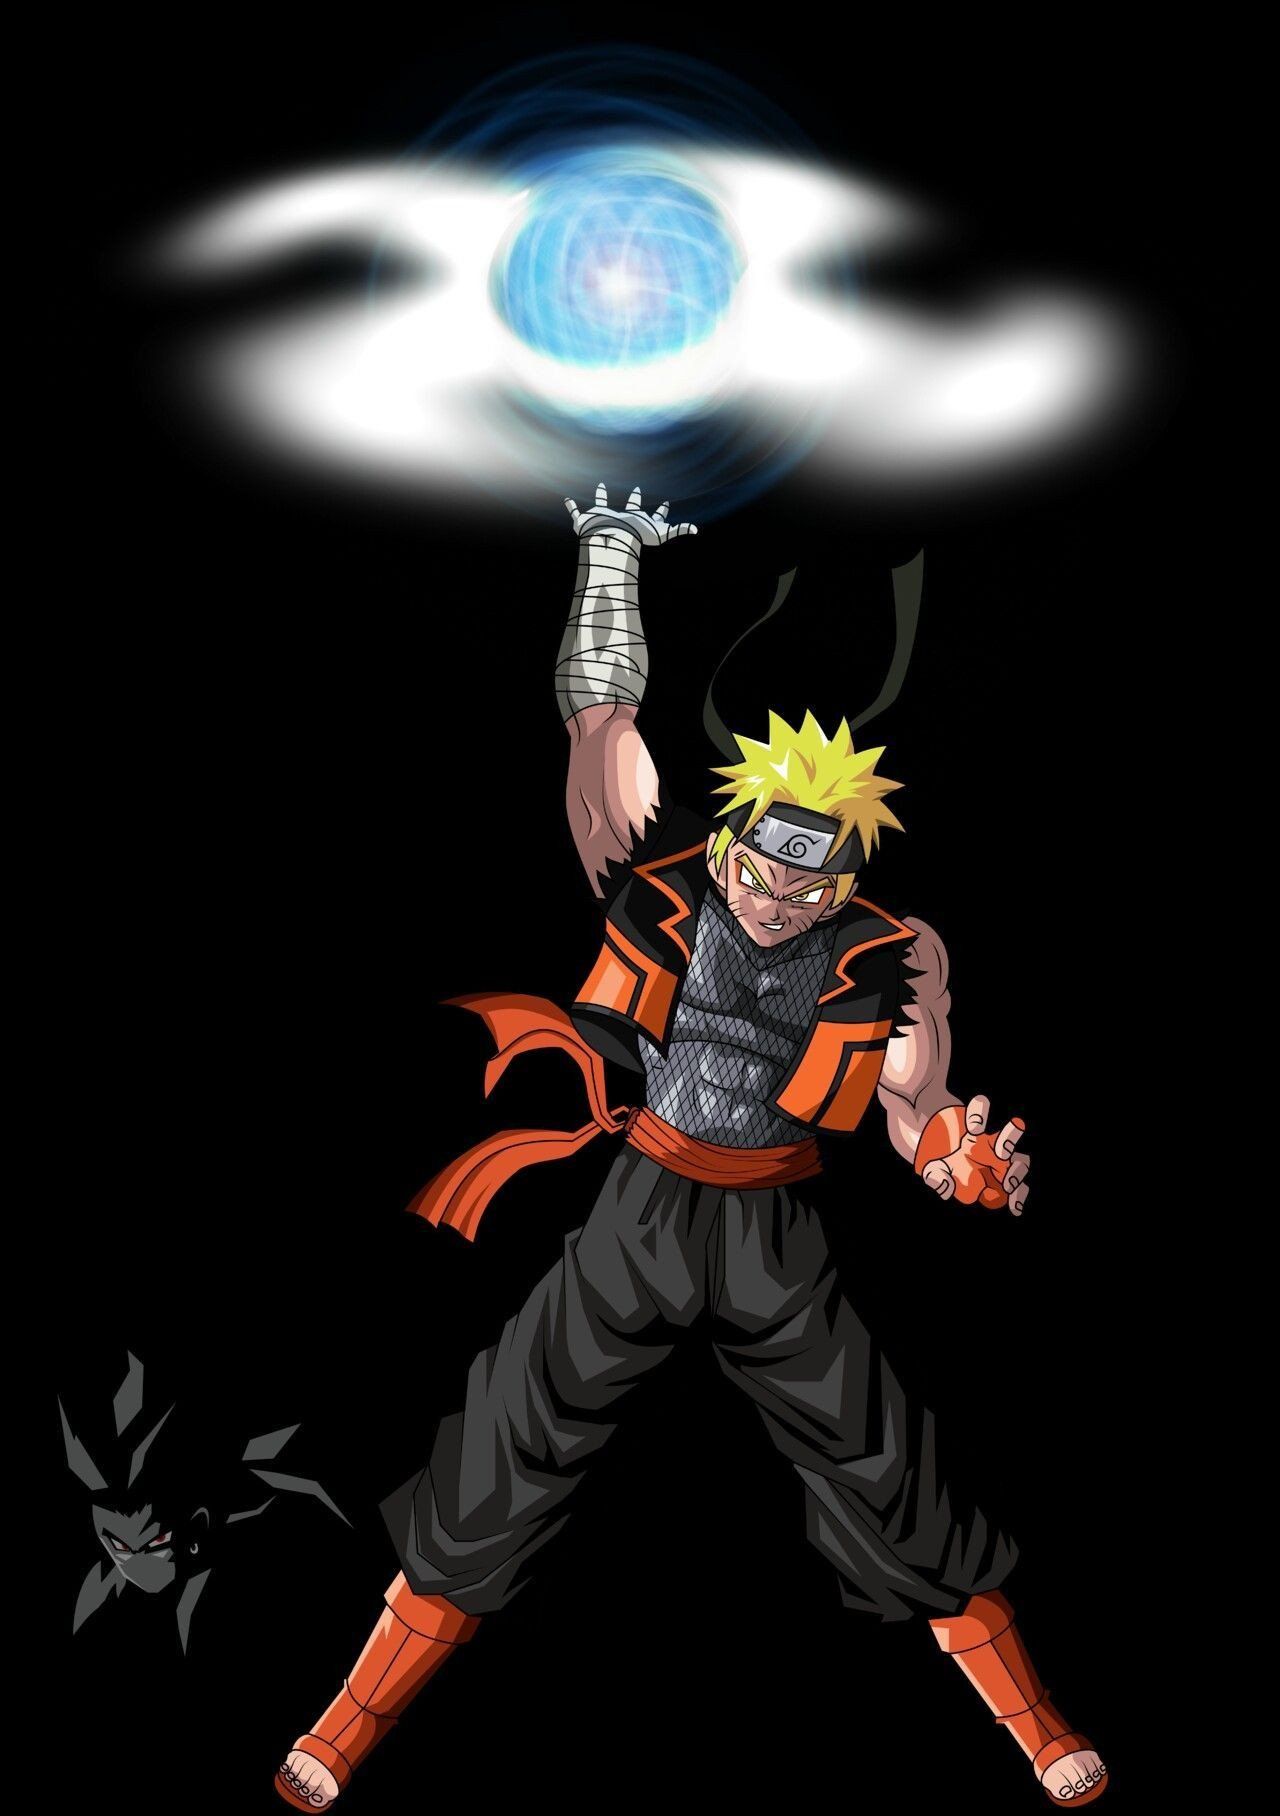 Naruto Iphone X Wallpapers